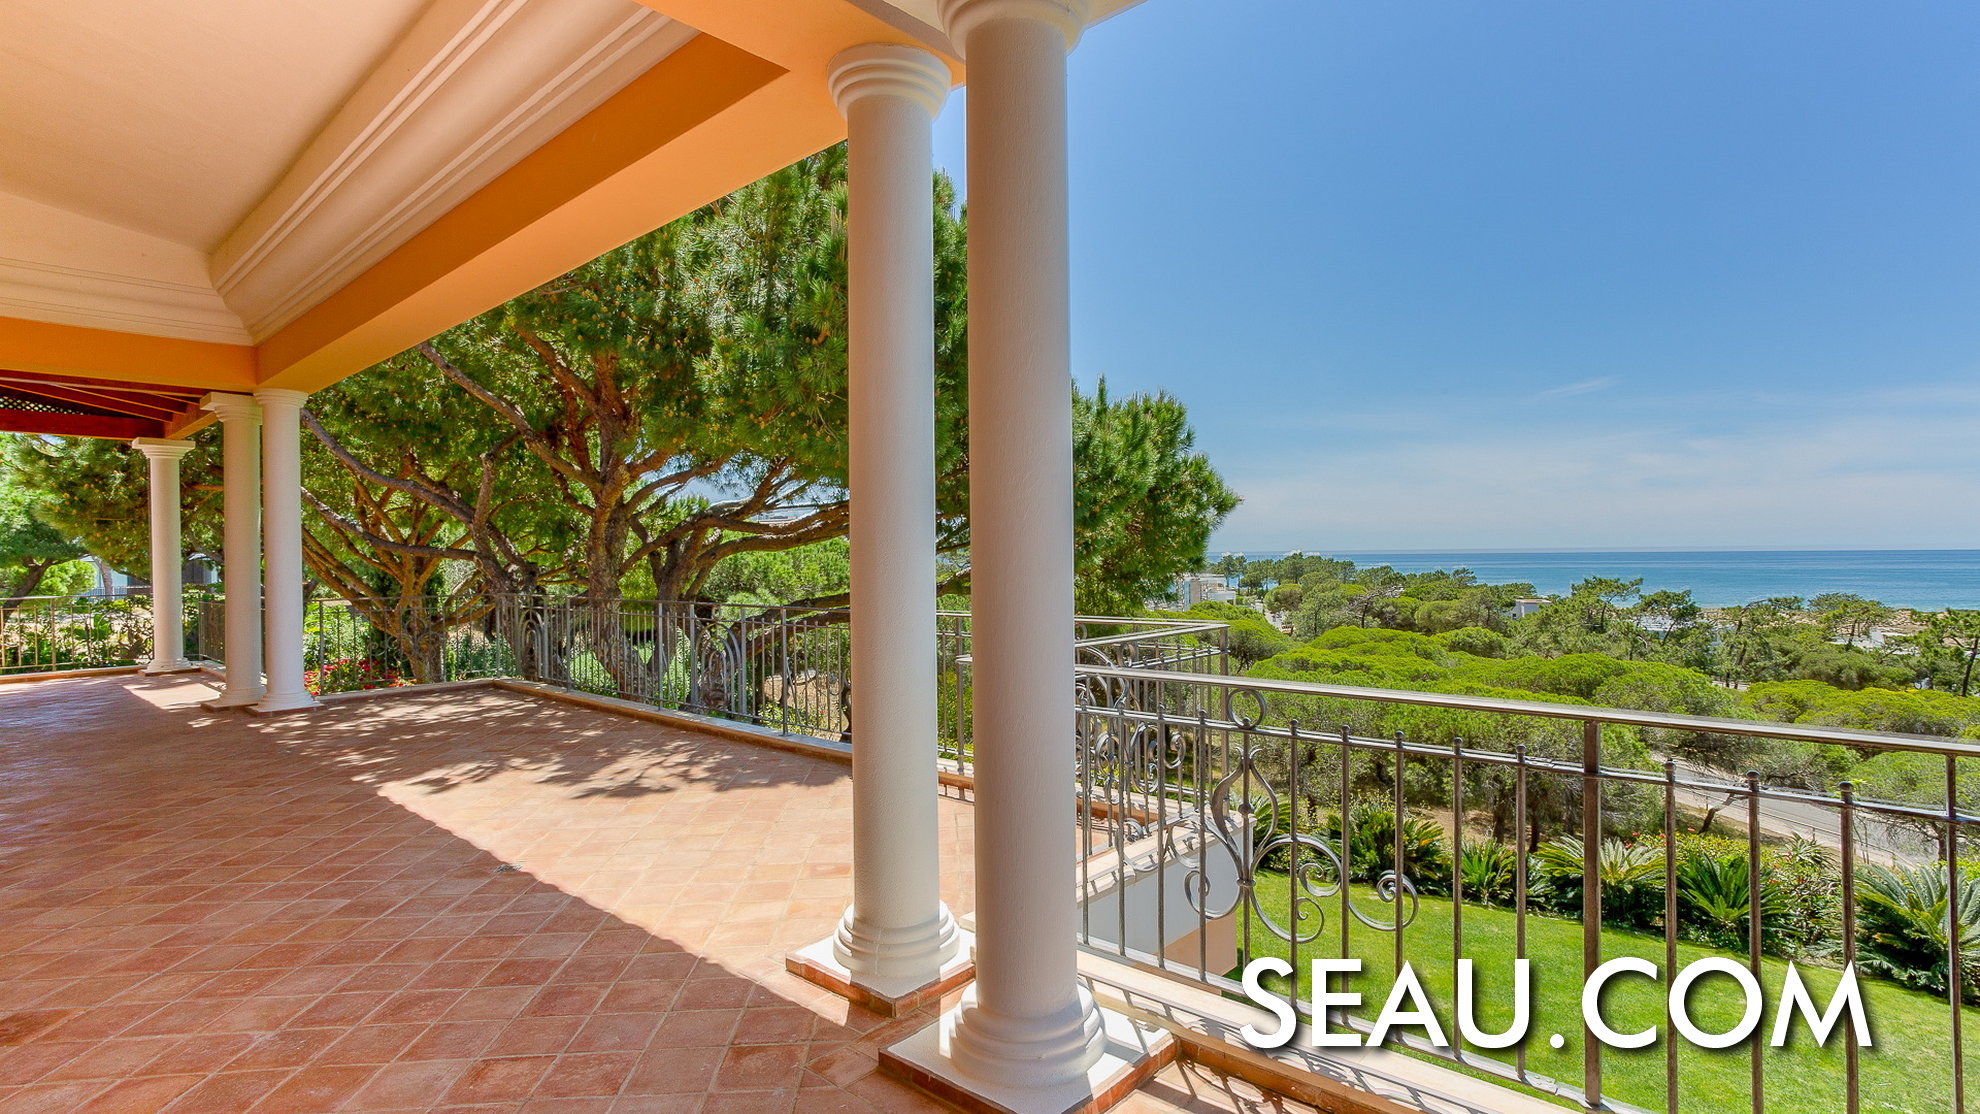 The view from the property is a unique feature, with a privileged location on a high point, with lots of green, beginning of the natural park of the Ria Formosa